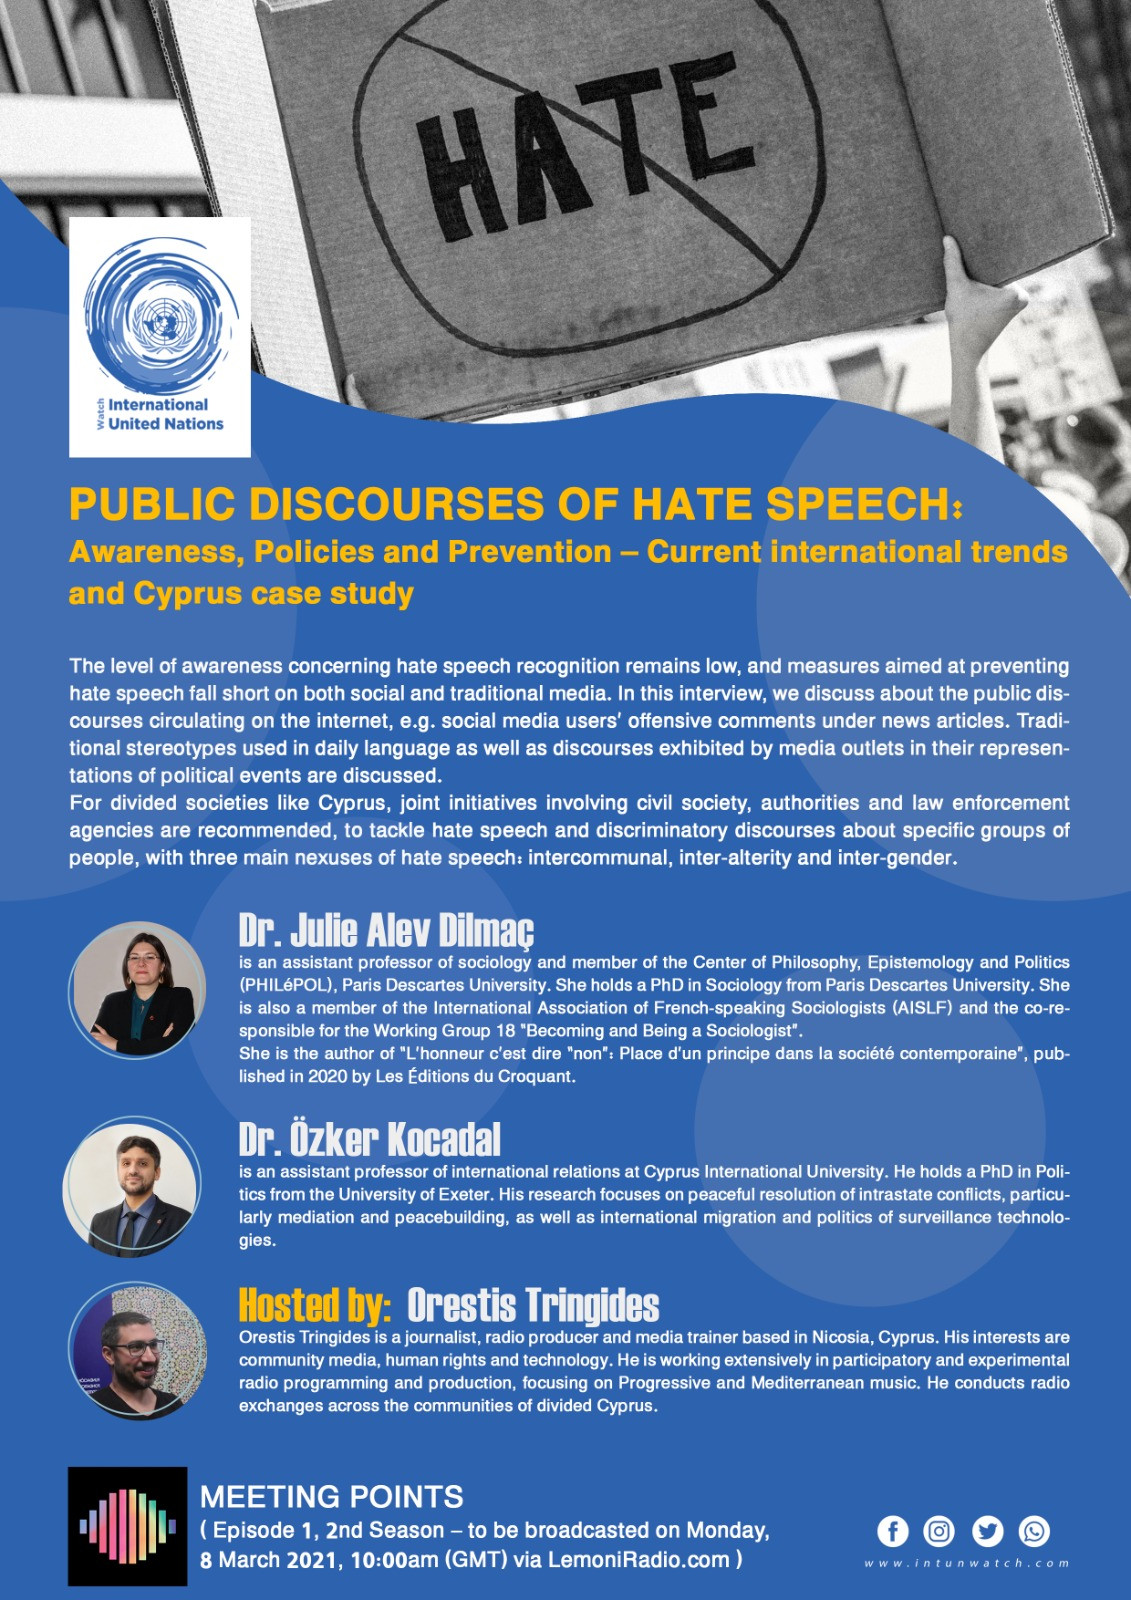  PUBLIC DISCOURSES OF HATE SPEECH: Awareness, Policies and Prevention in Cyprus